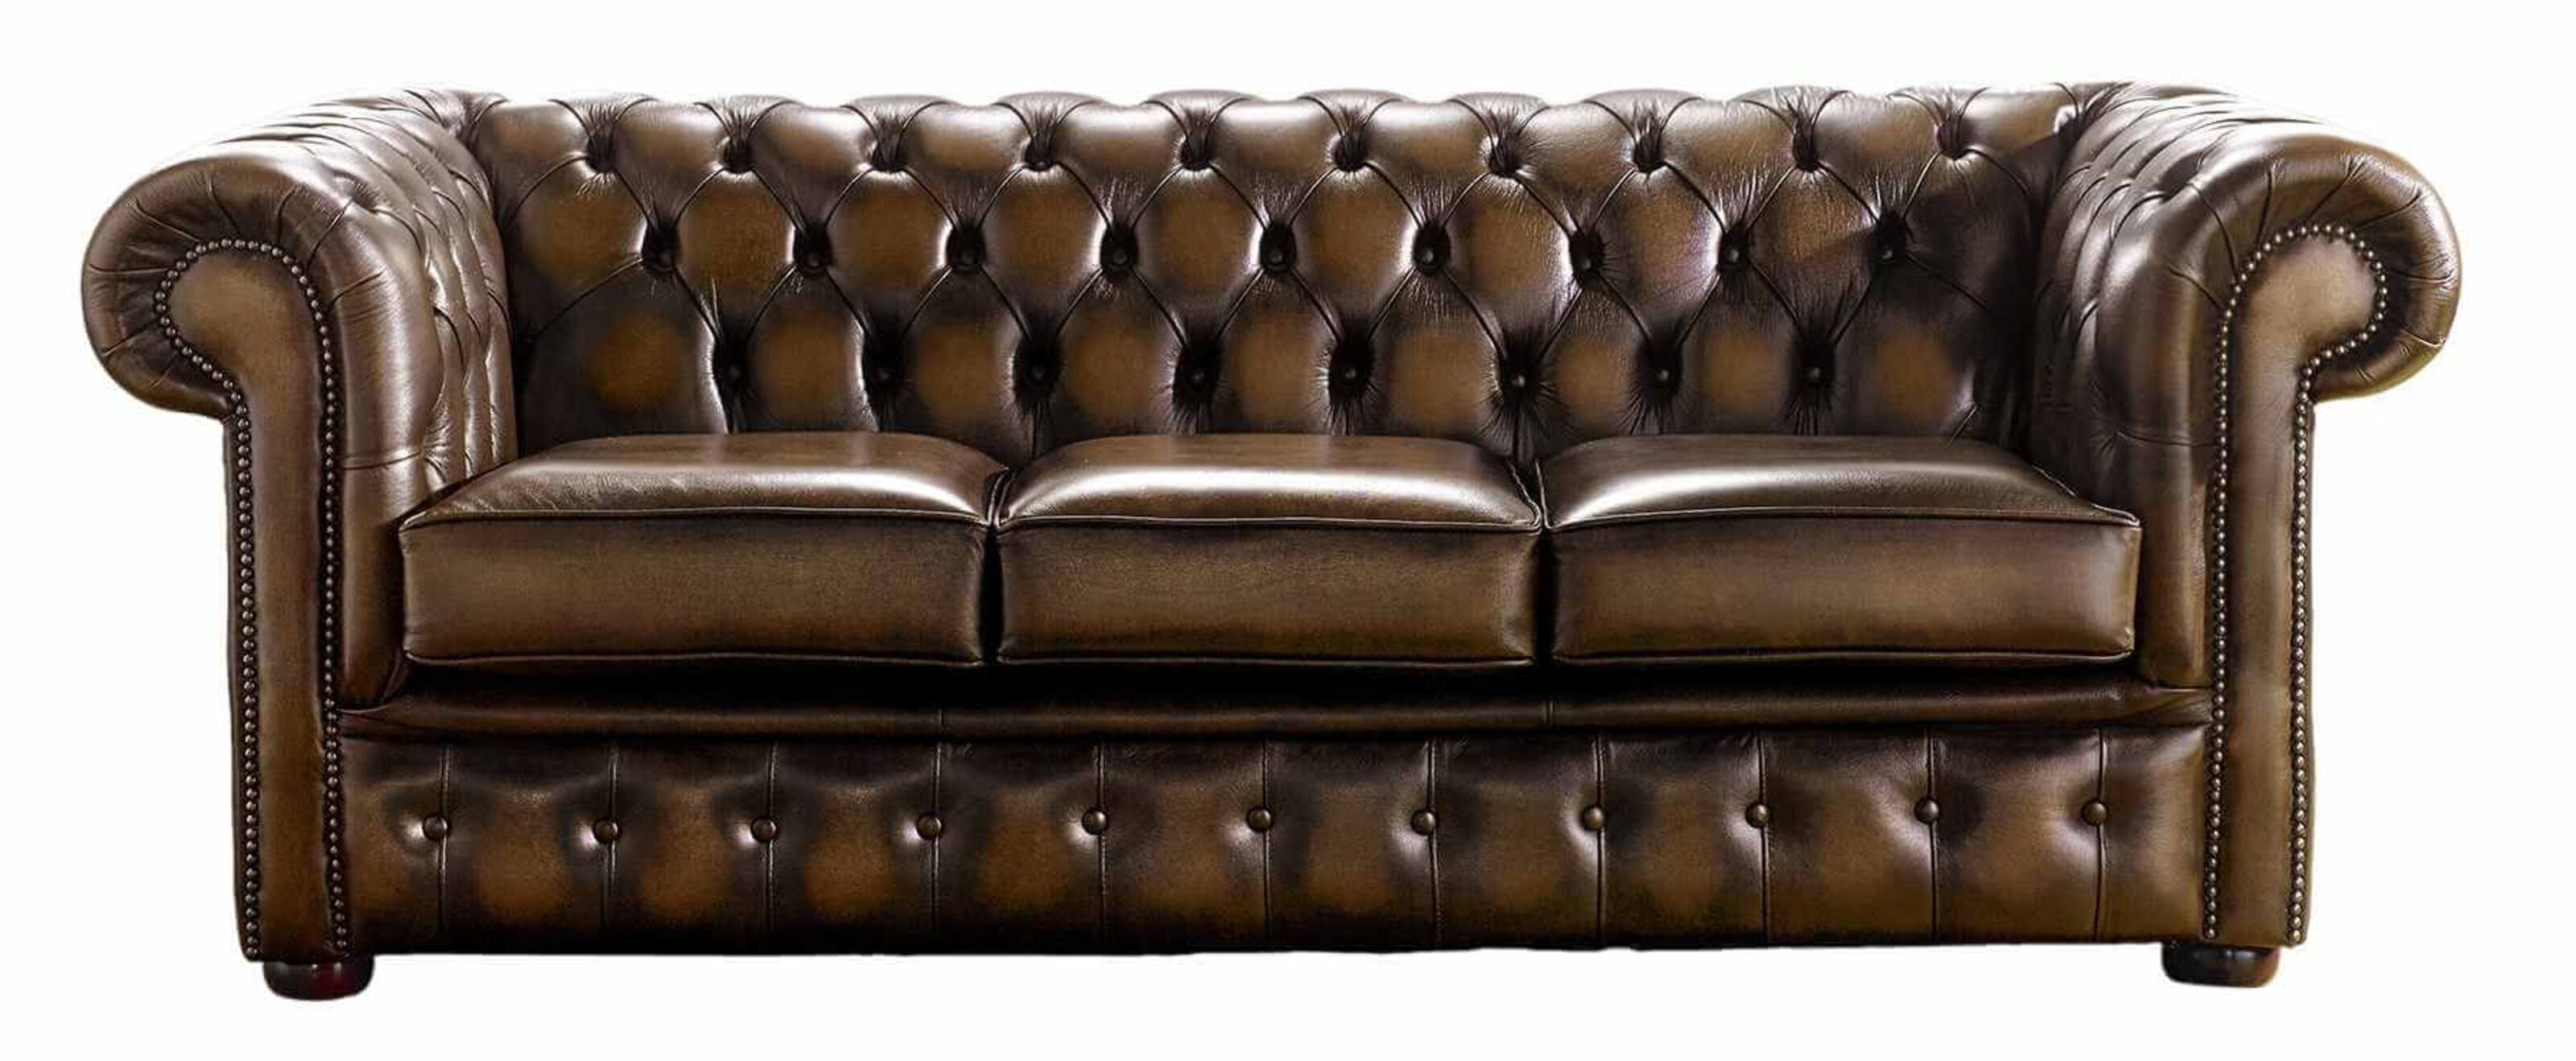 Adding Vintage Charm: Antique Sofas to Elevate Your Home Decor from DesignerSofas4u  %Post Title